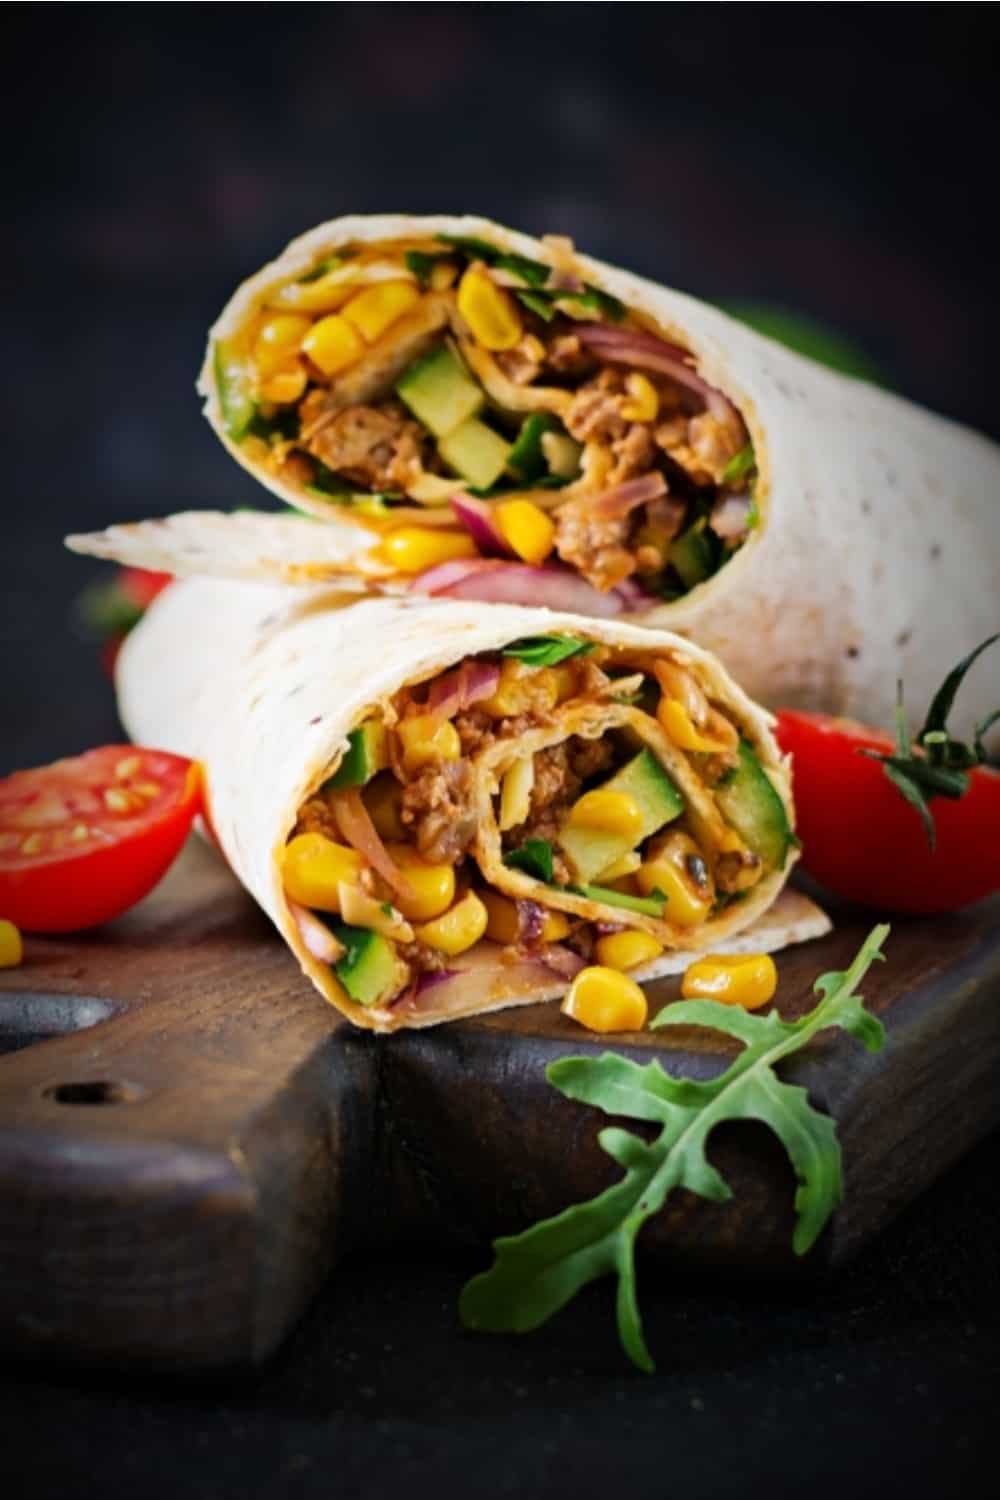 Burritos wraps with beef and vegetables